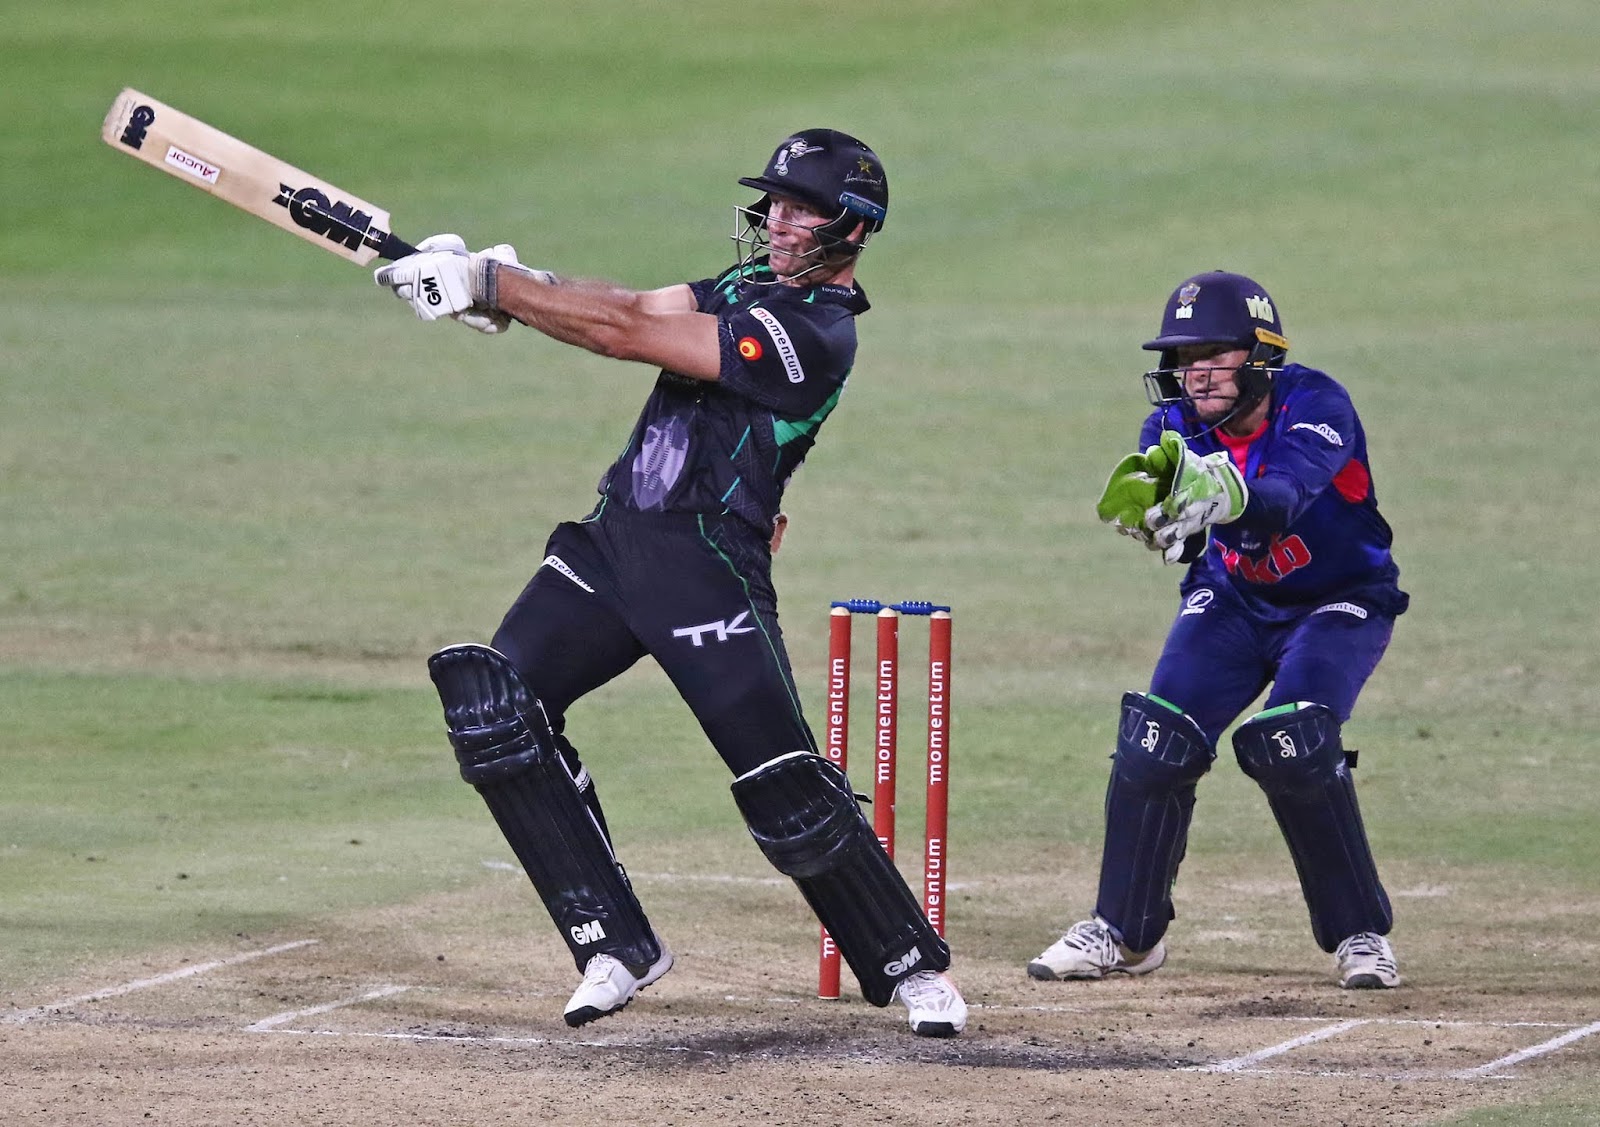 Sarel Erwee pulls one over mid-wicket over for the Hollywoodbets Dolphins in the Momentum One Day Cup